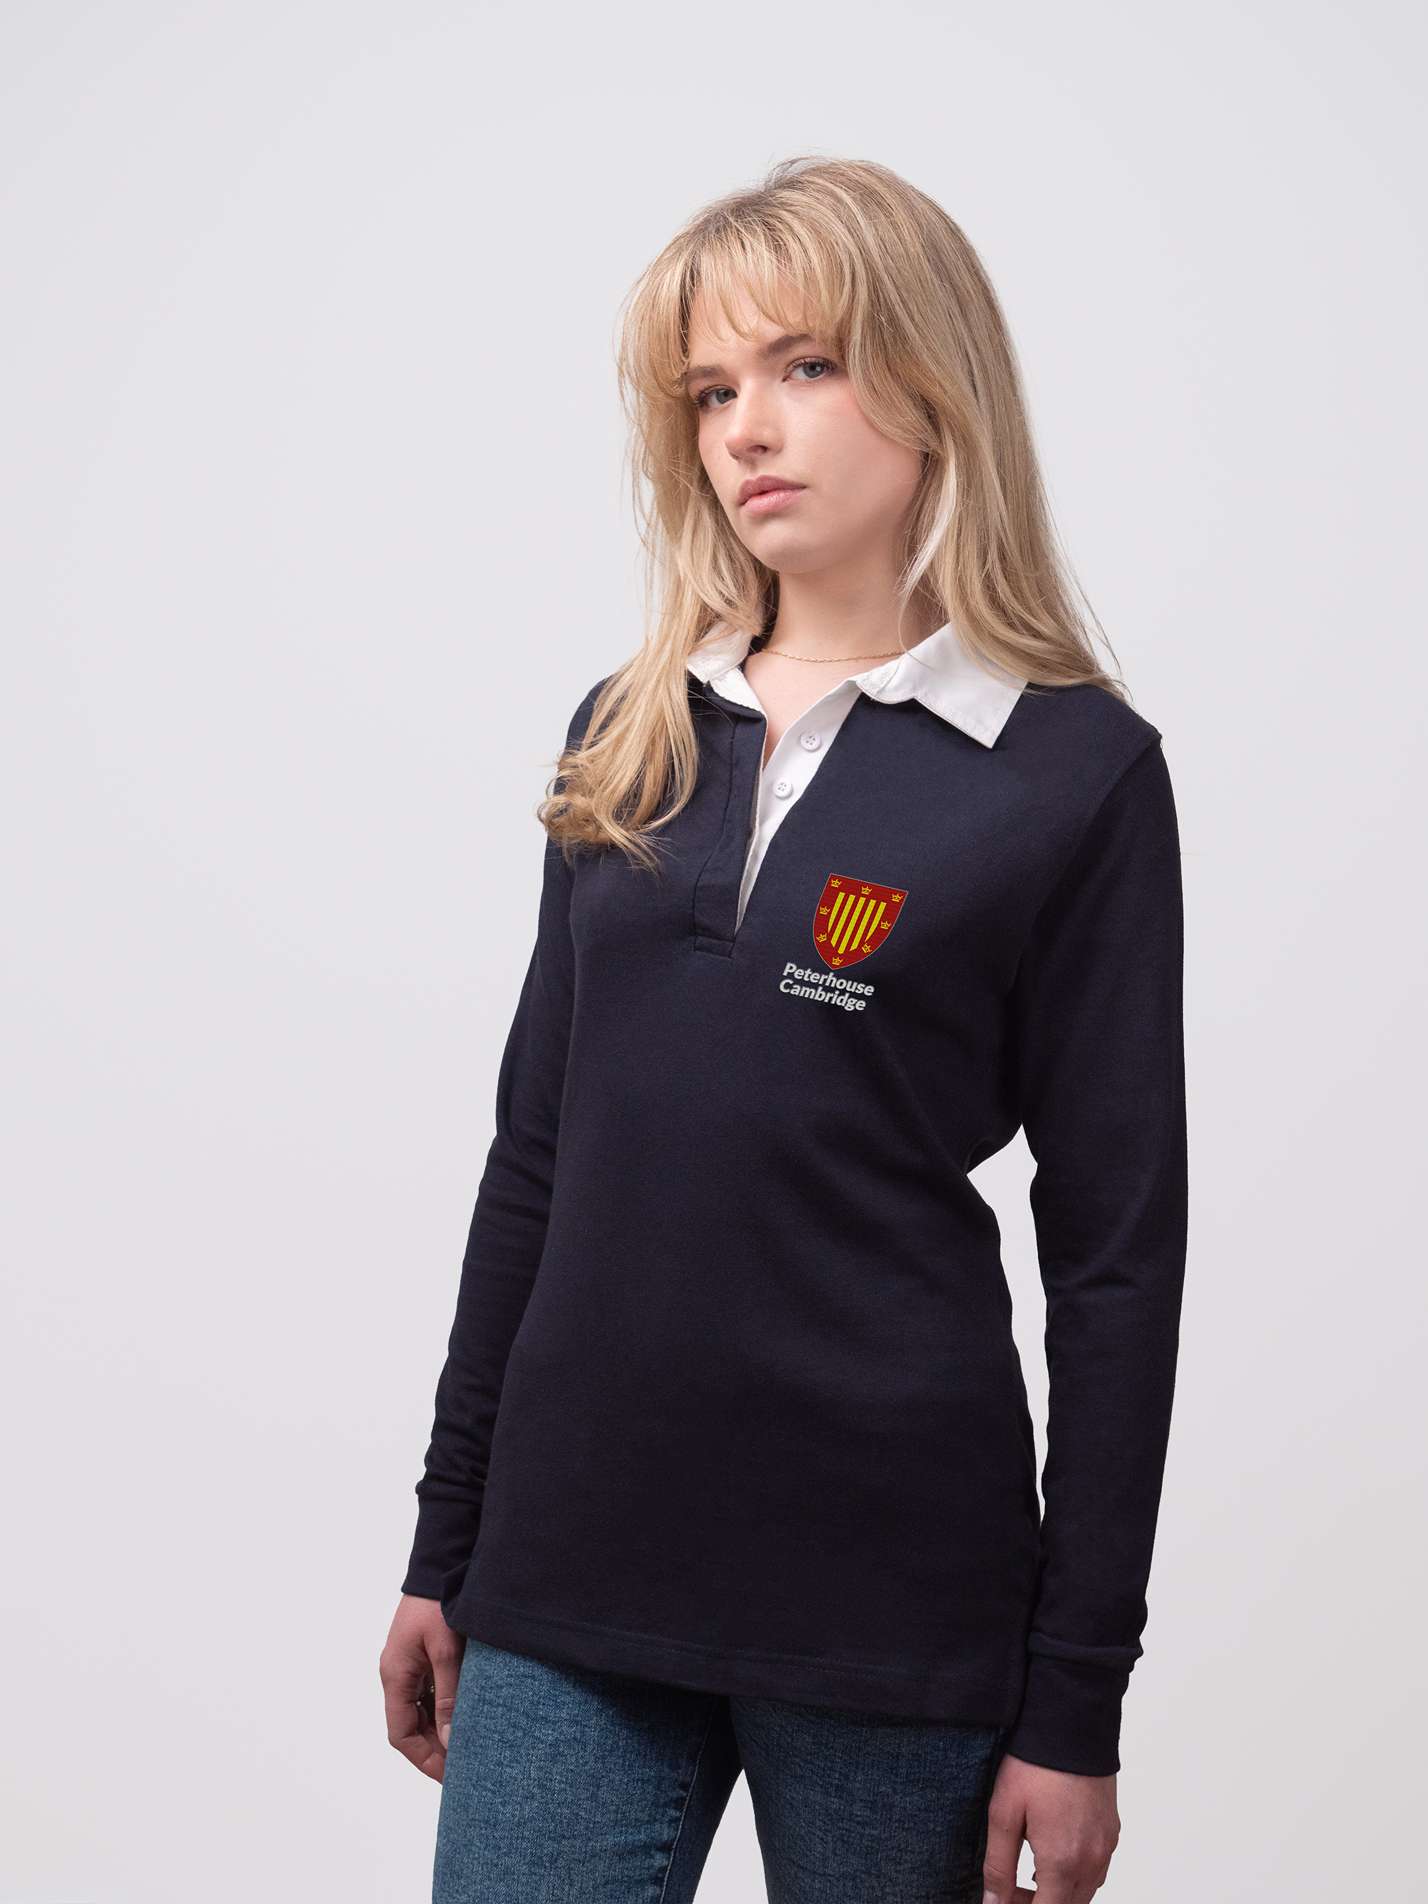 Student wearing a navy Peterhouse College rugby shirt with embroidered crest